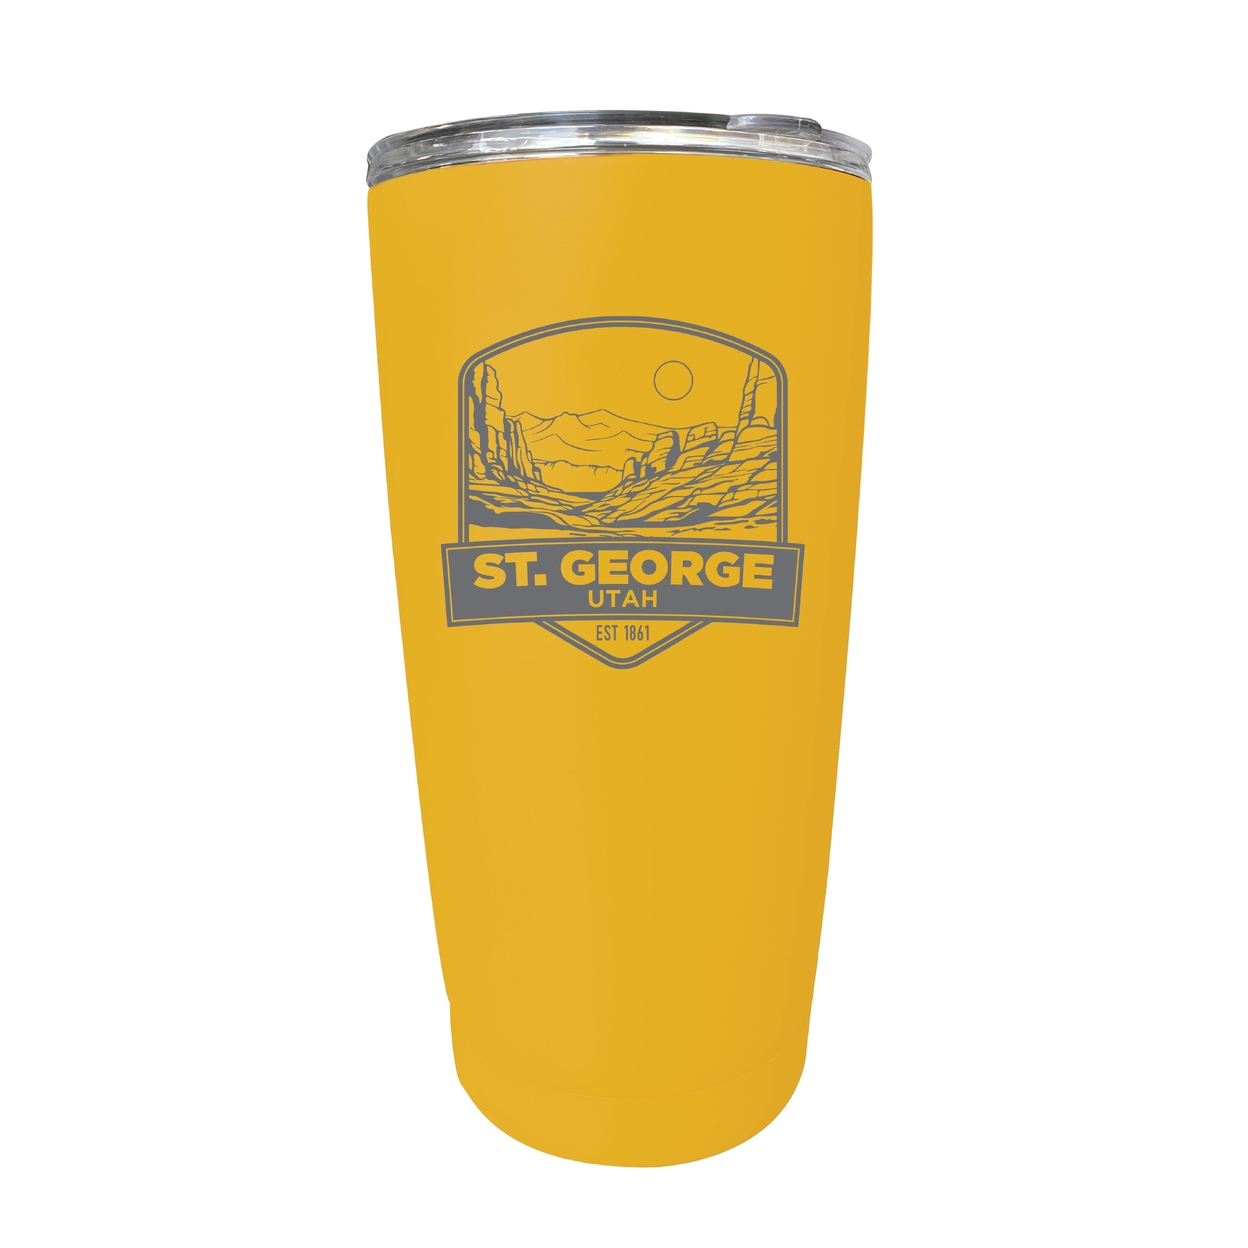 St. George Utah Souvenir 16 Oz Engraved Stainless Steel Insulated Tumbler - Red,,4-Pack